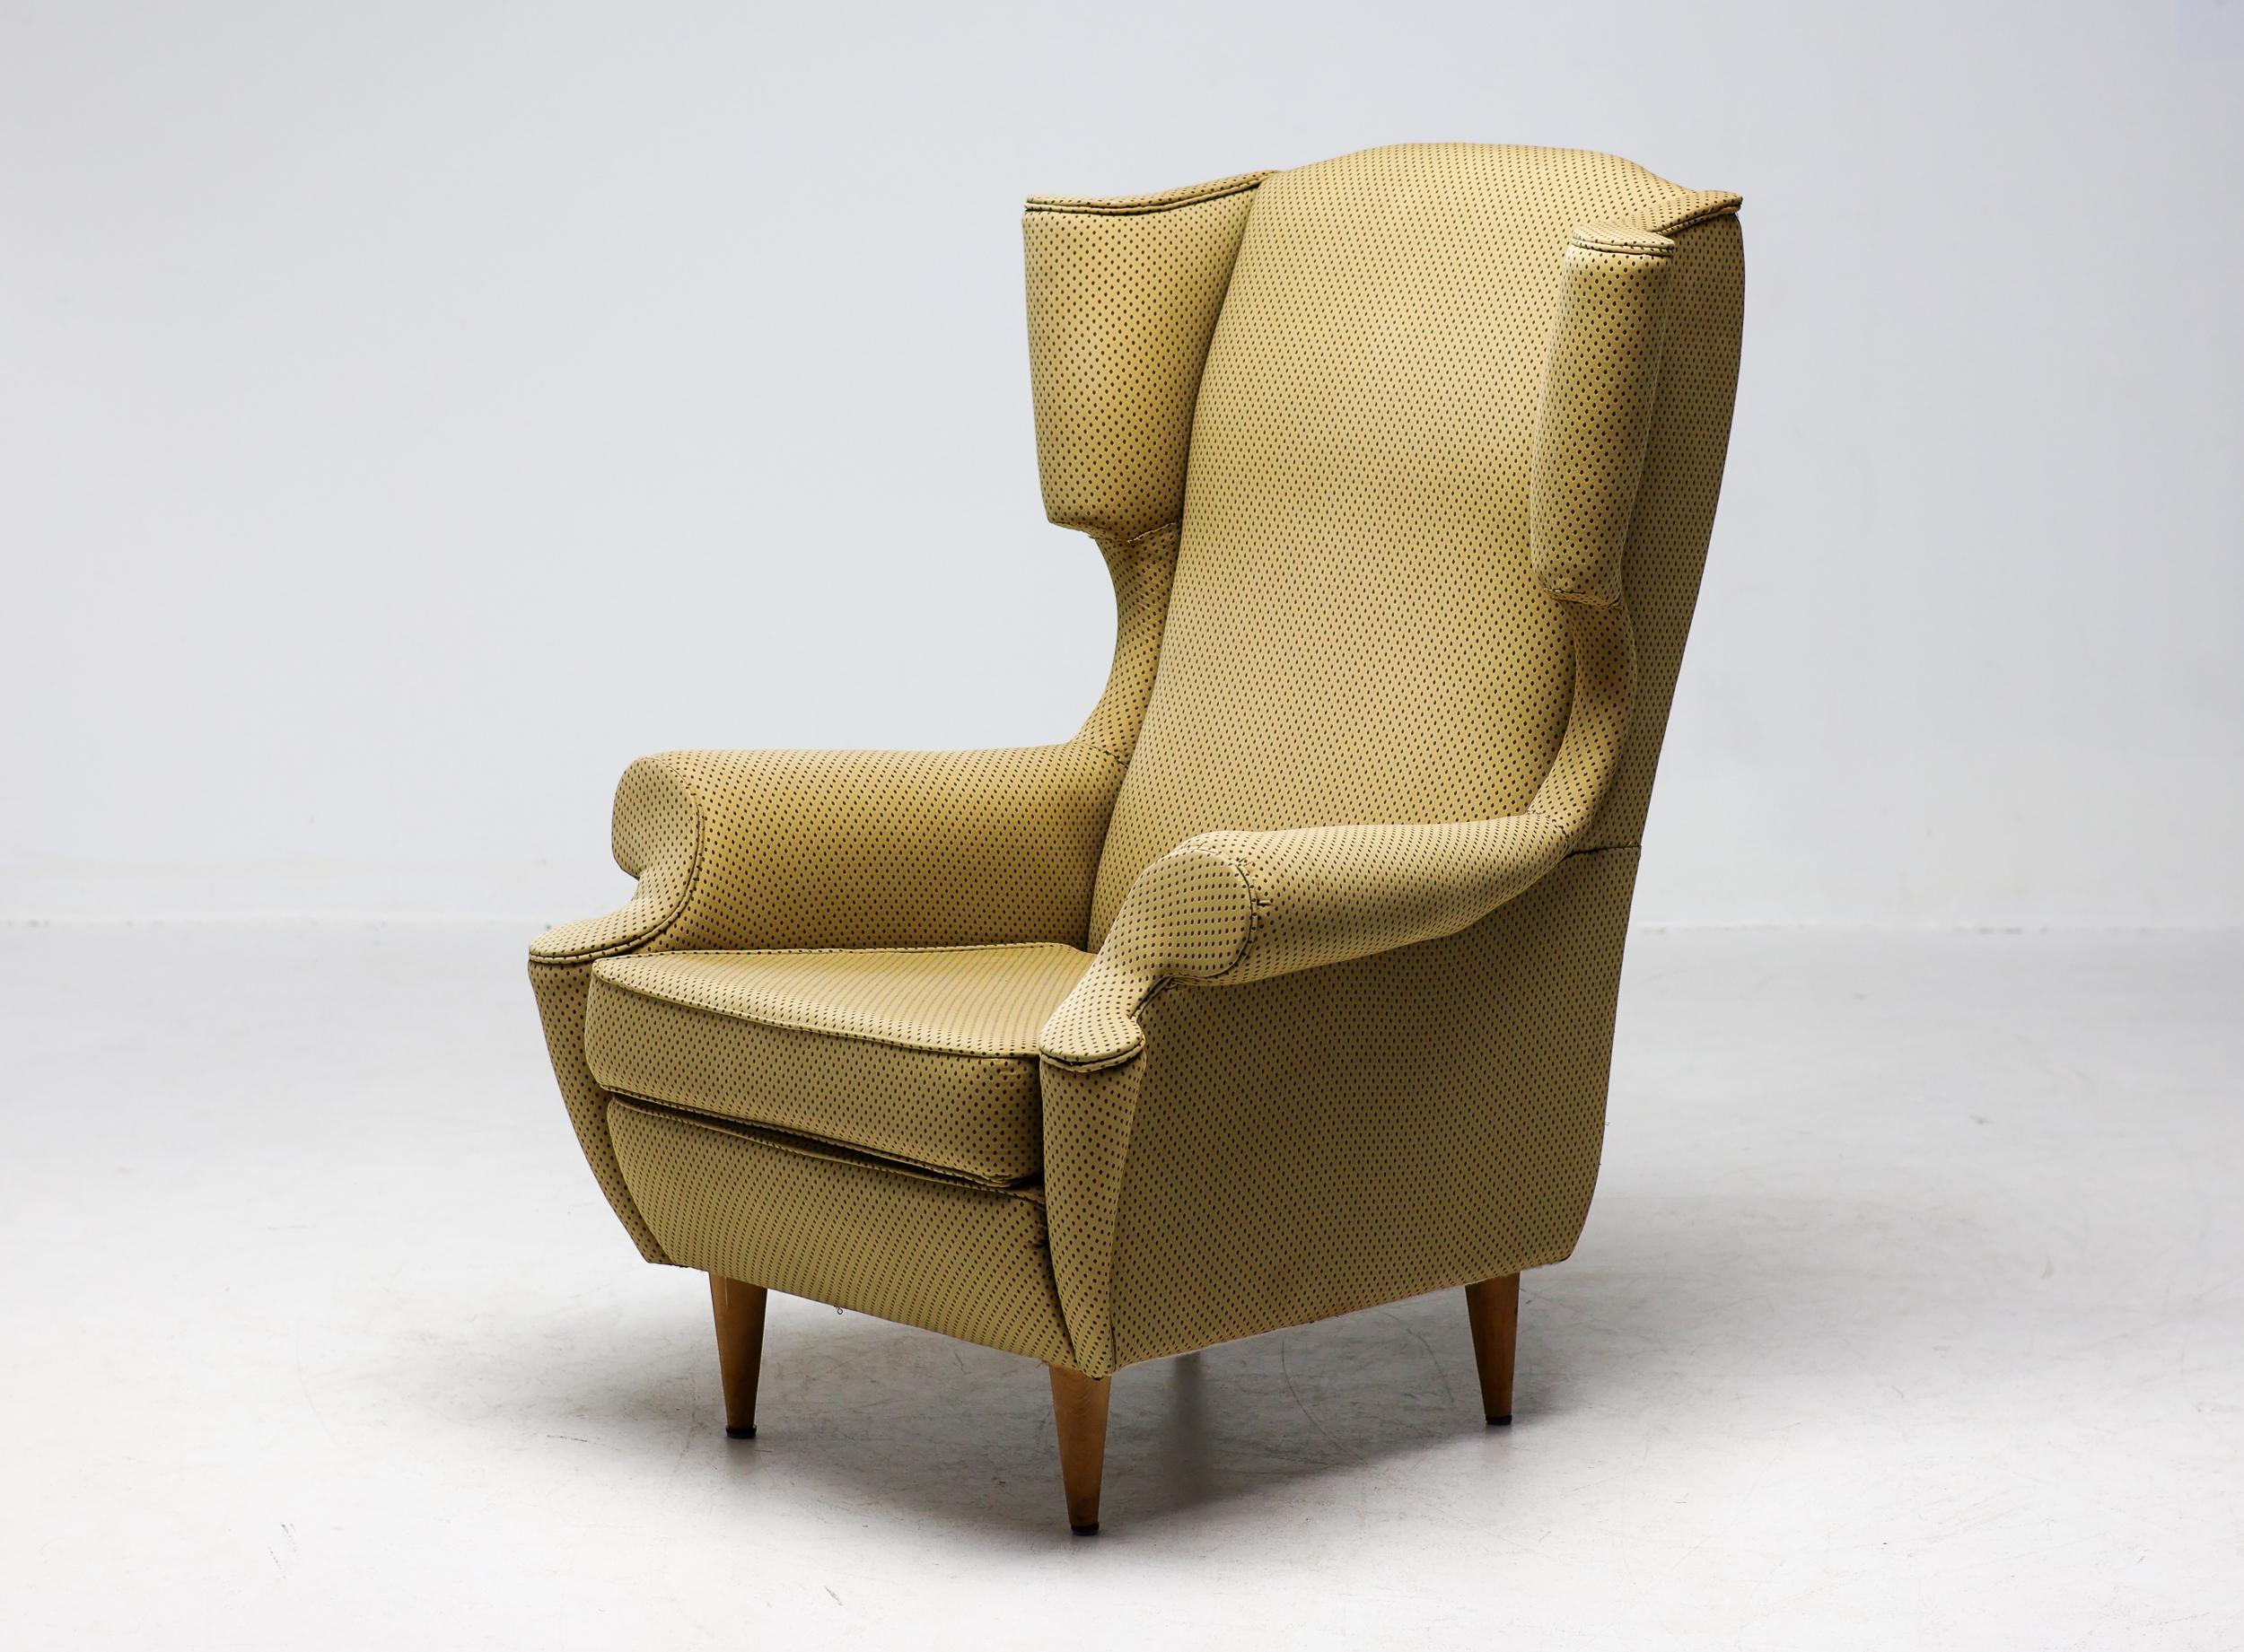 Wingback chair, produced by I.S.A. Bergamo, Italy, circa 1950.
Large and very comfortable armchair, reupholstered quite poorly sometime in the past. The fabric is not damaged or soiled but the work just wasn't done to our standards and the fabric